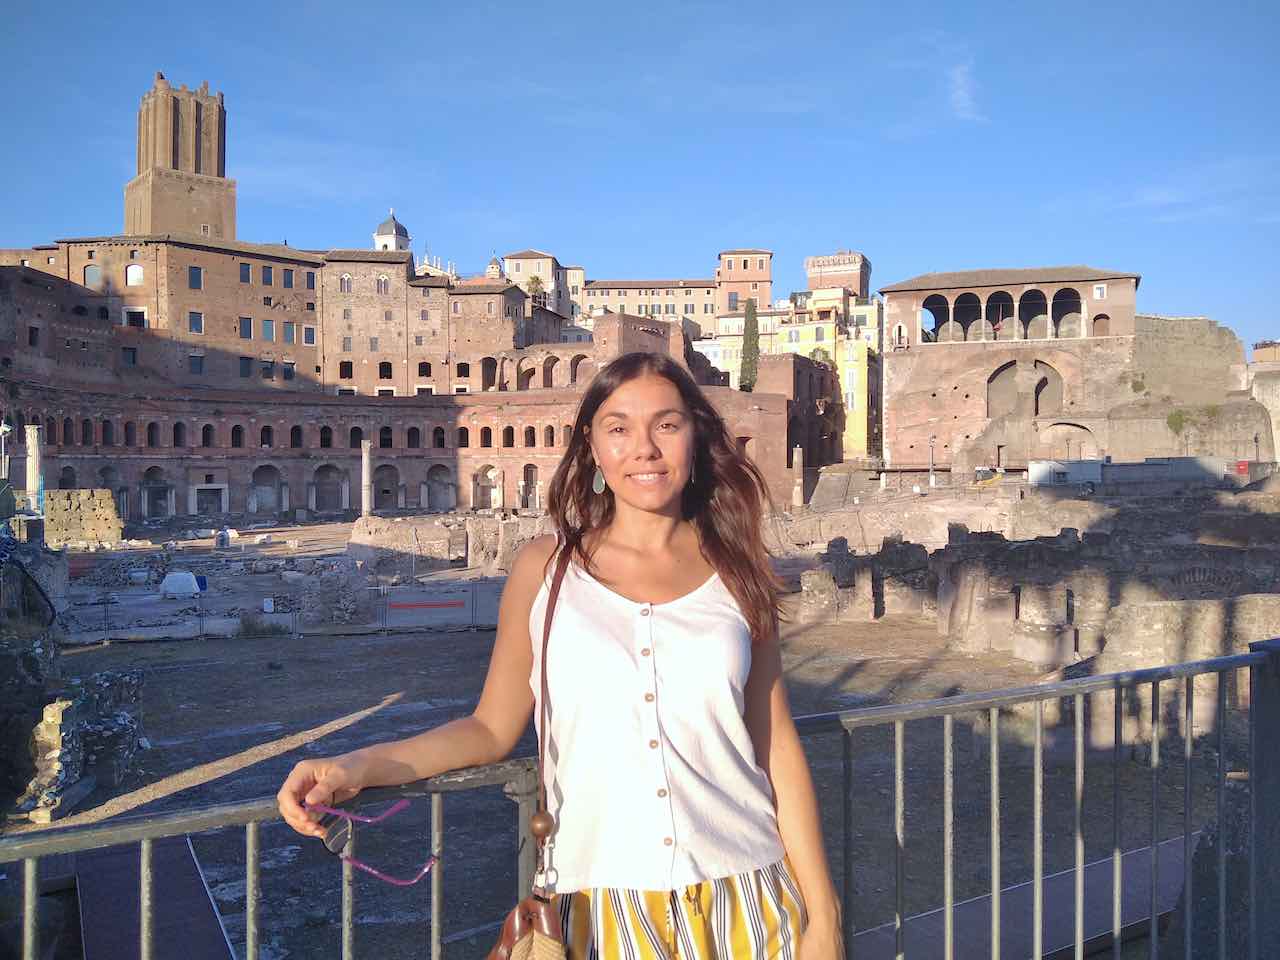 A young woman standing along Via dei Fori Imperiali in Rome, Italy. She's wearing a white top and light yellow trousers, the summer blue sky behind her. On the background, the profile of the Im perial Forum with the old brown-bricks buildings. she's smiling at the camera, happy to be there.